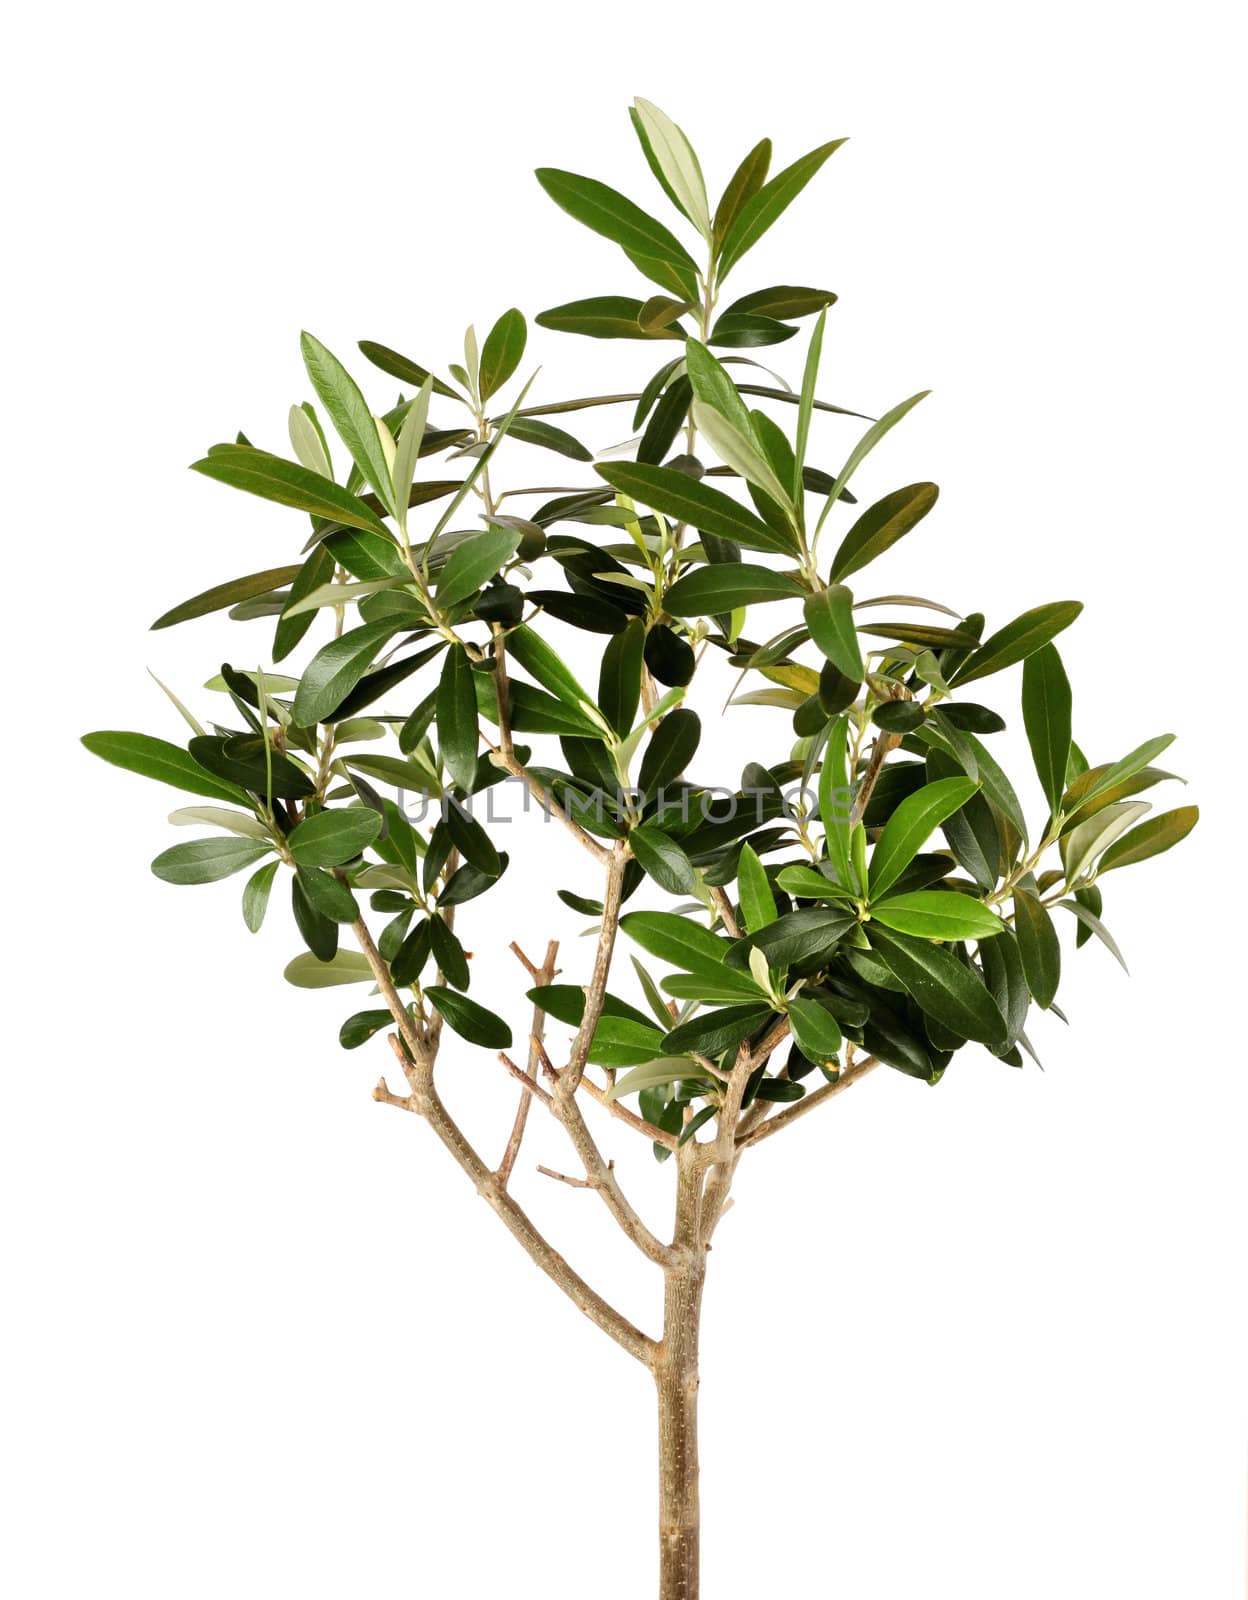 Lush young olive tree closeup isolated on white